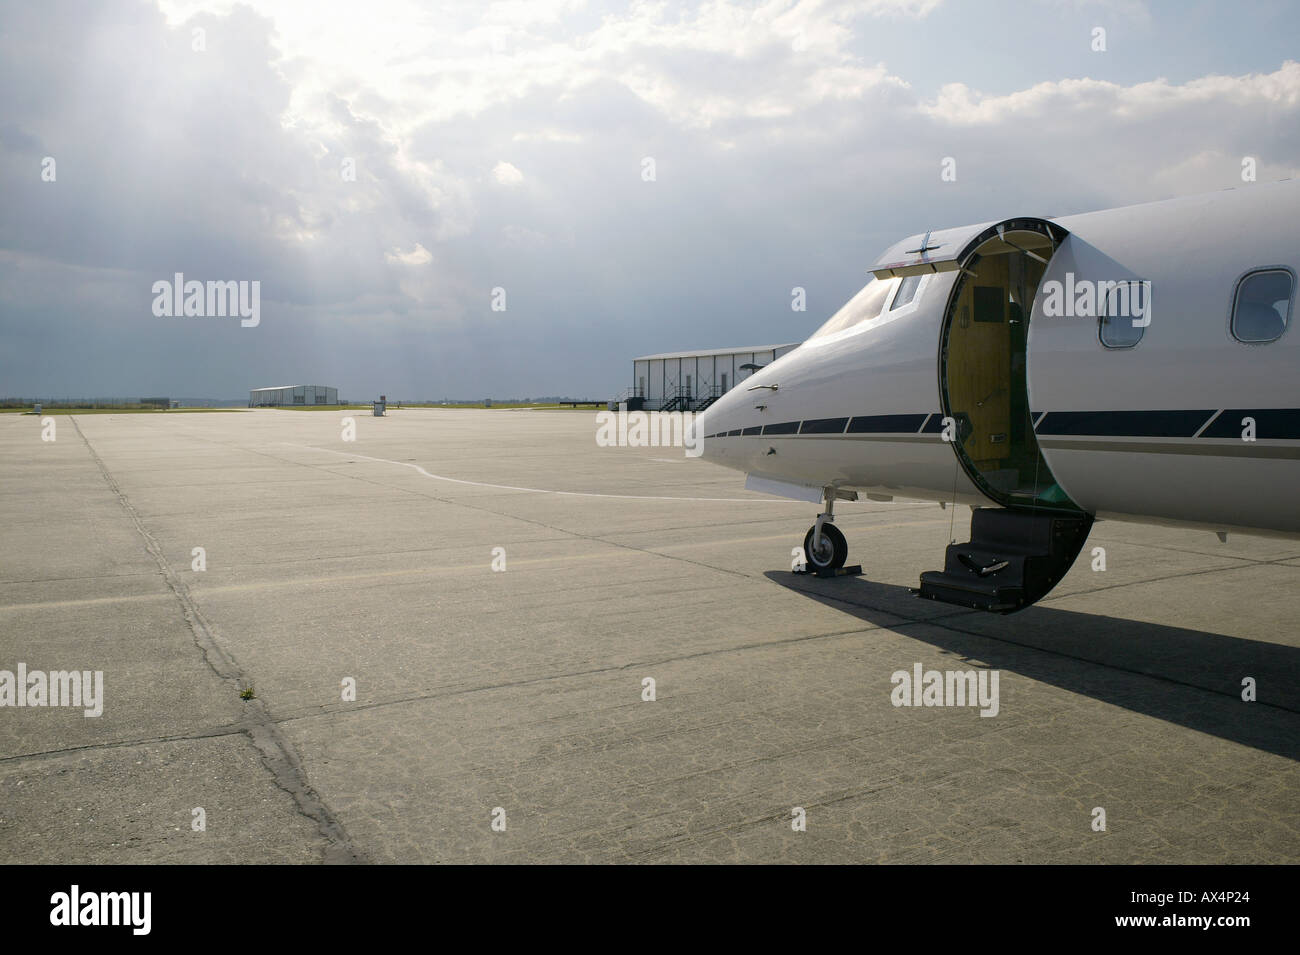 Private airplane on runway Stock Photo